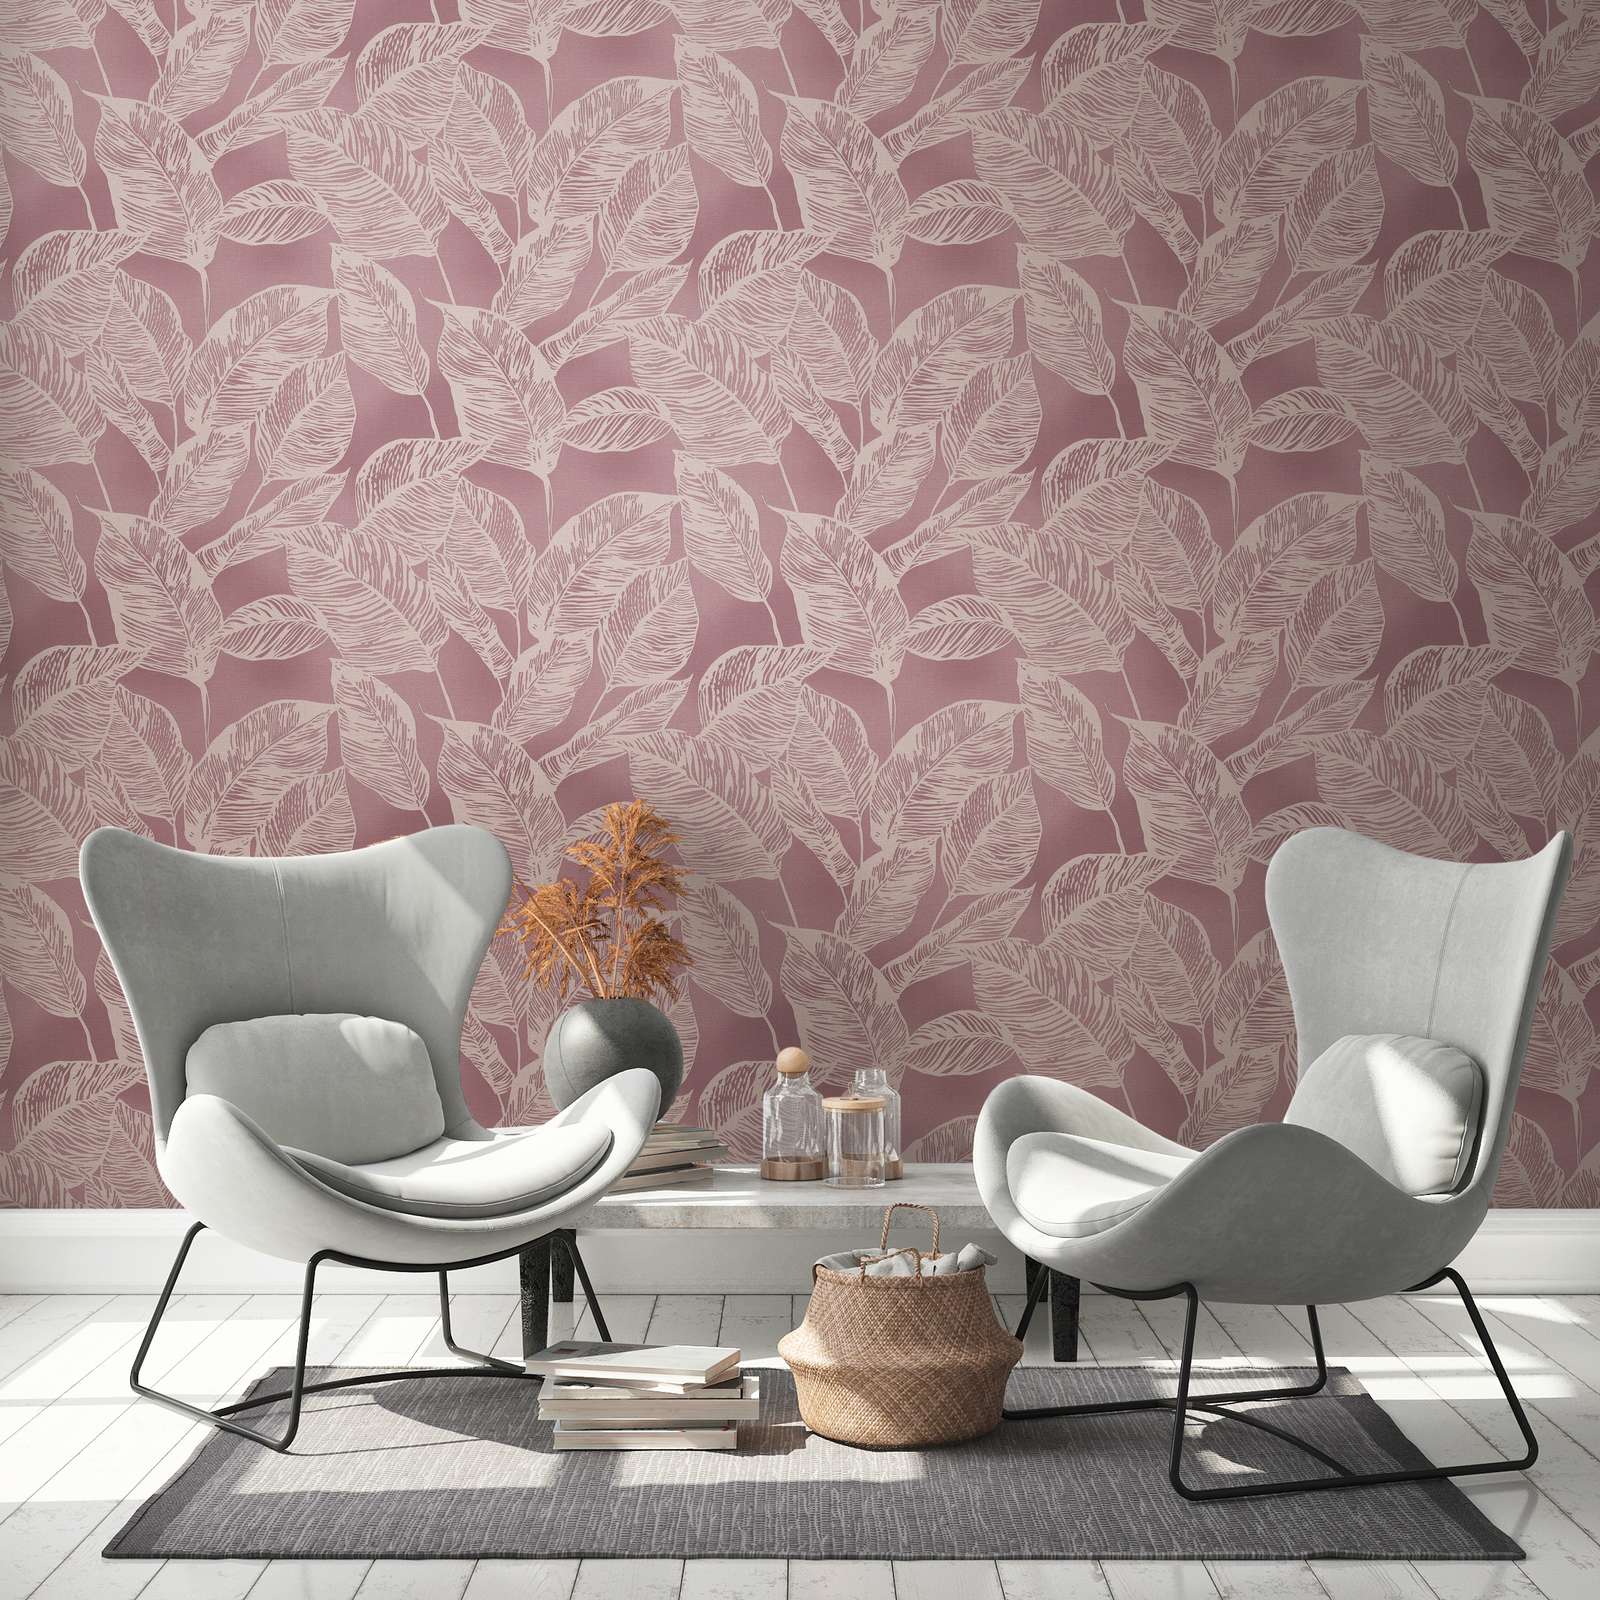             PVC-free non-woven wallpaper with leaf motif - pink, cream
        